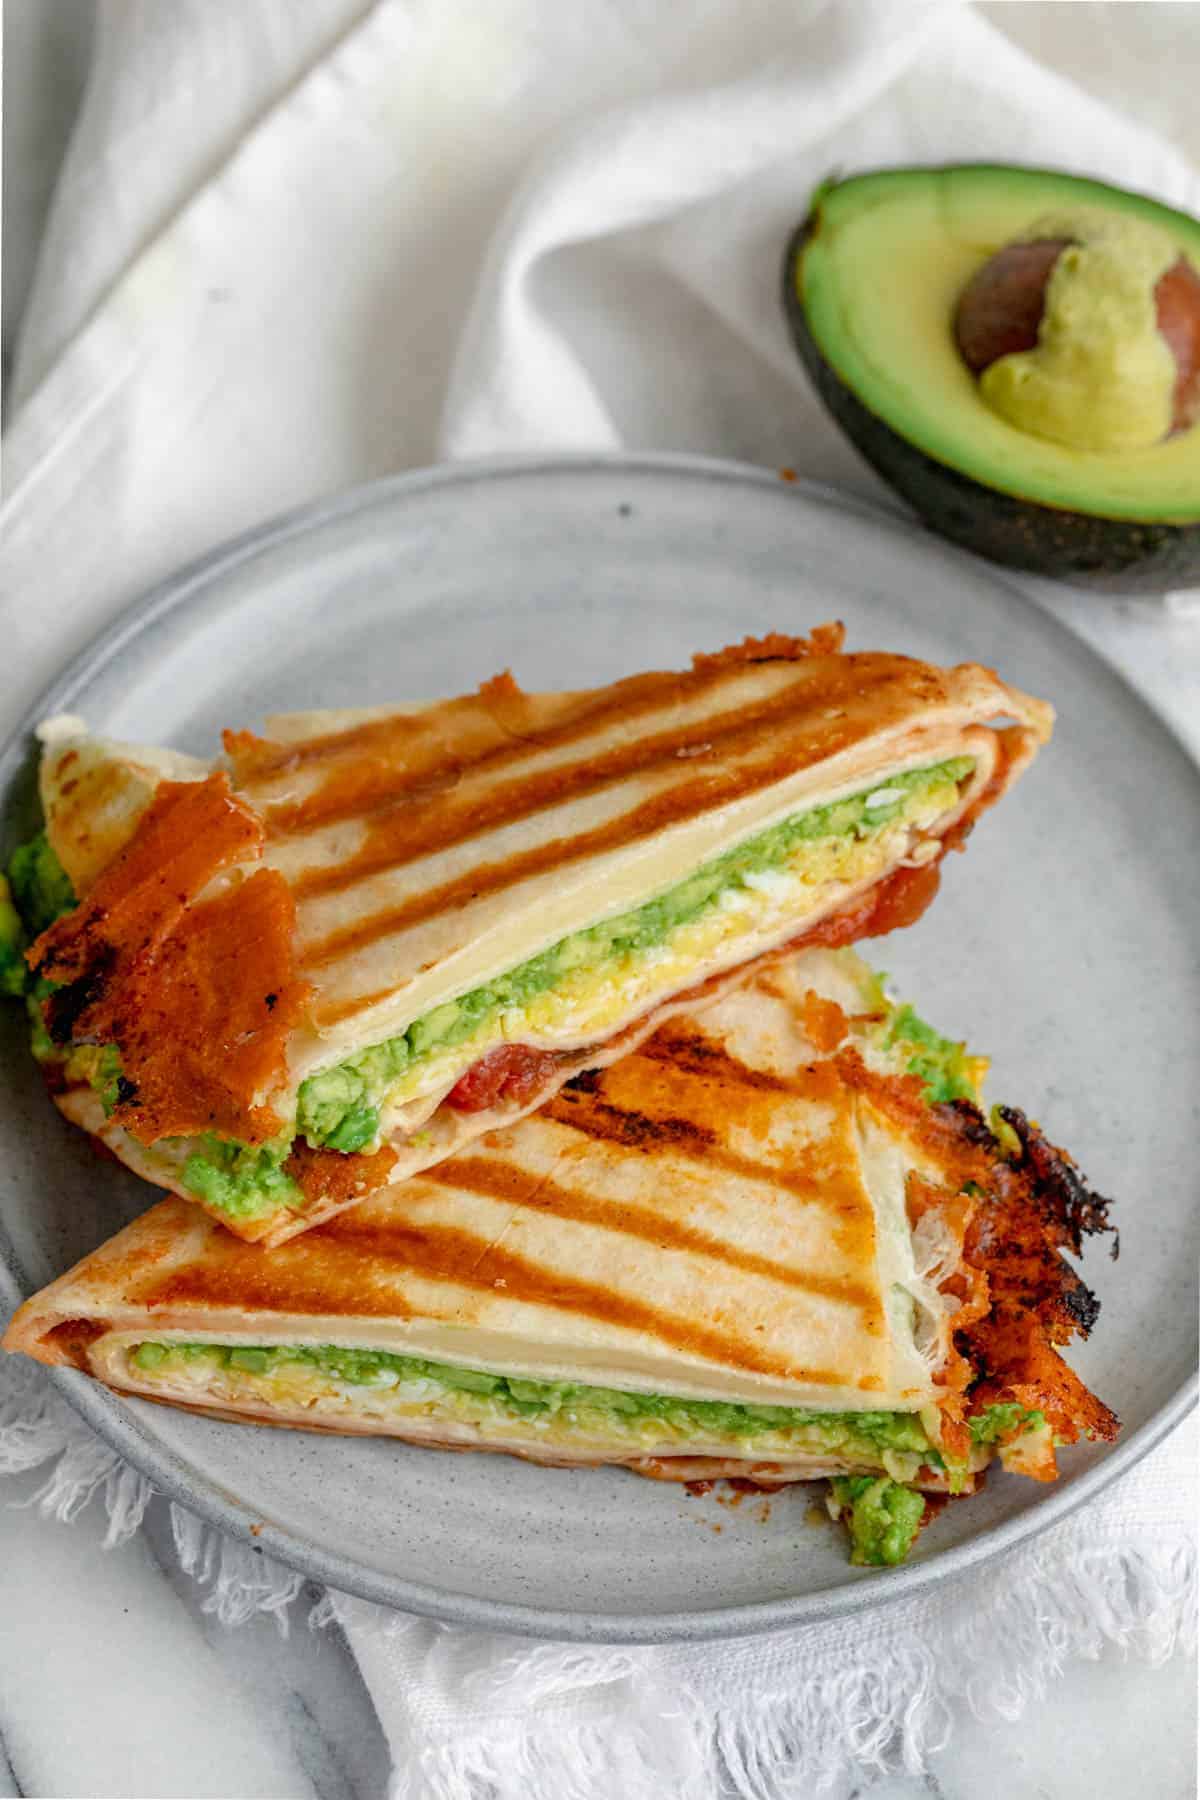 Breakfast tortilla wrap sliced in half on plate with avocado in background